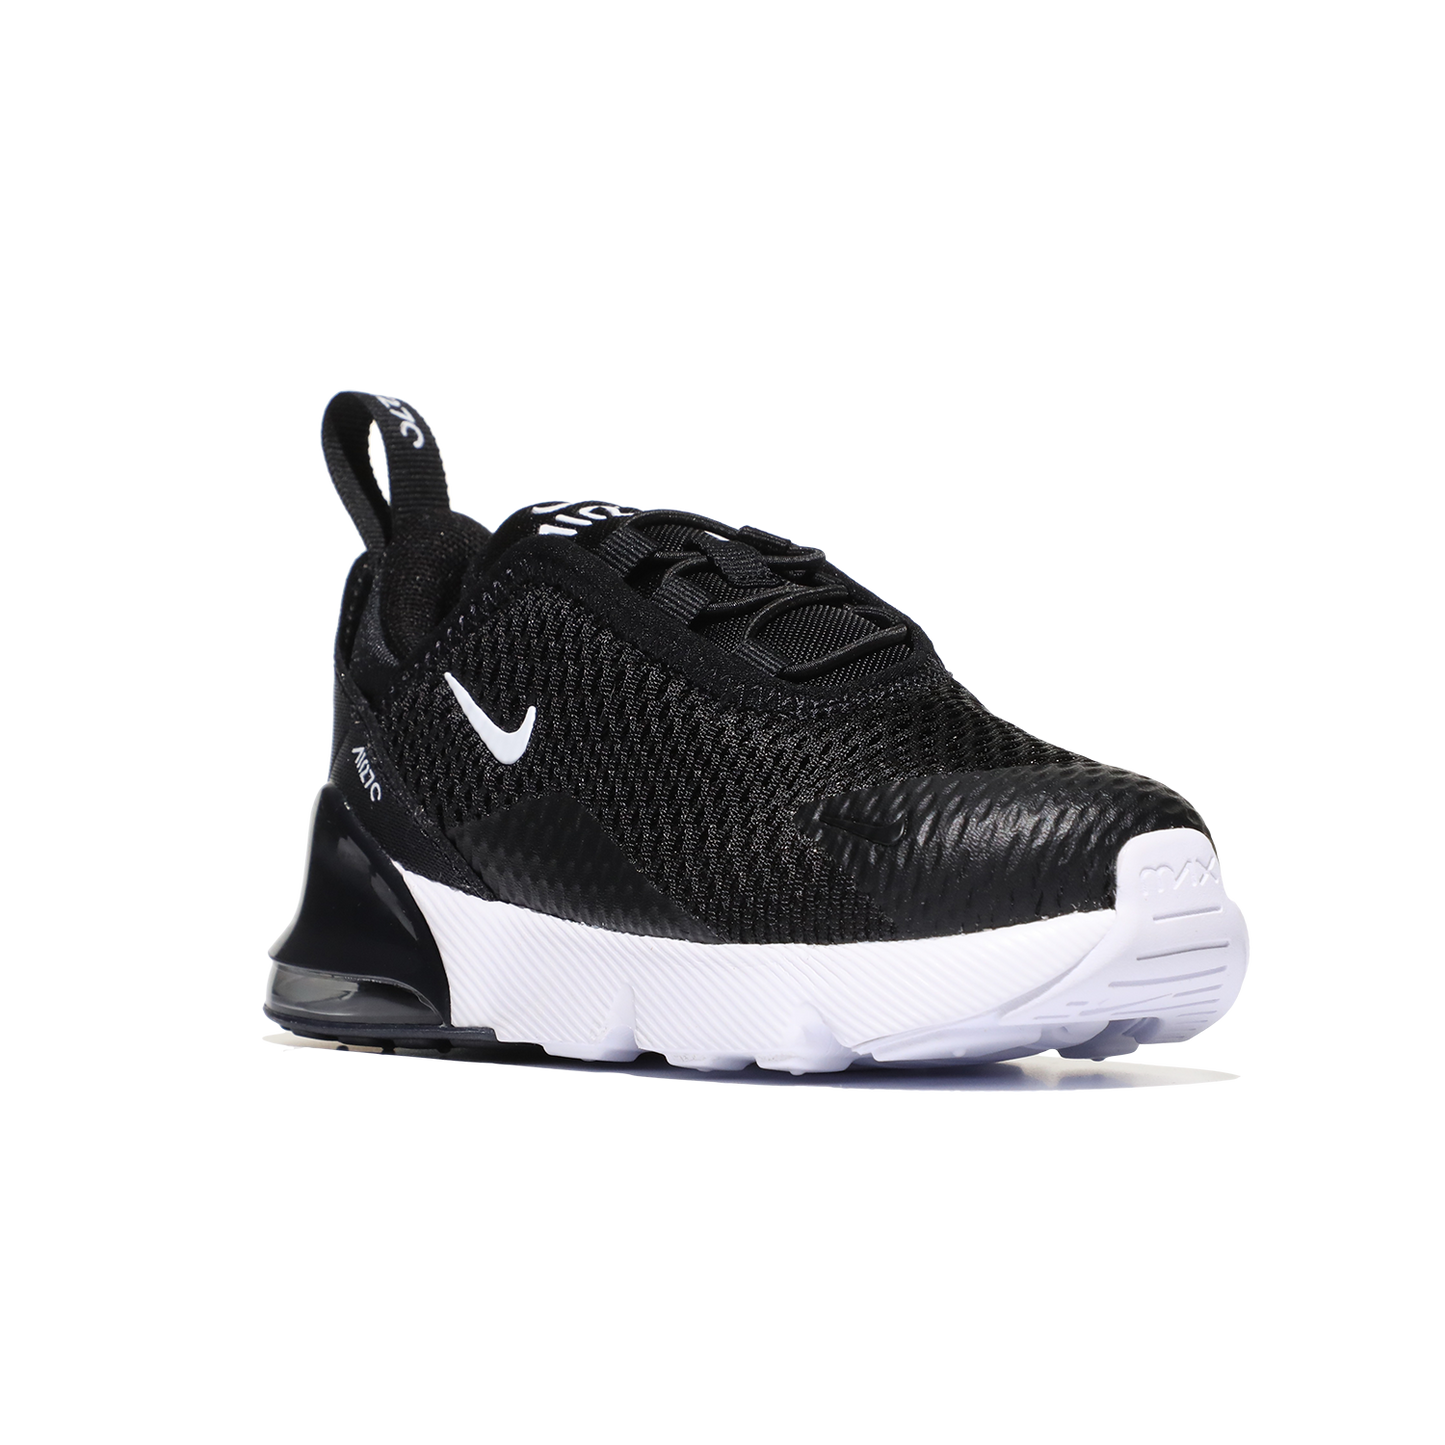 Image 7 of Air Max 270 (Infant/Toddler)